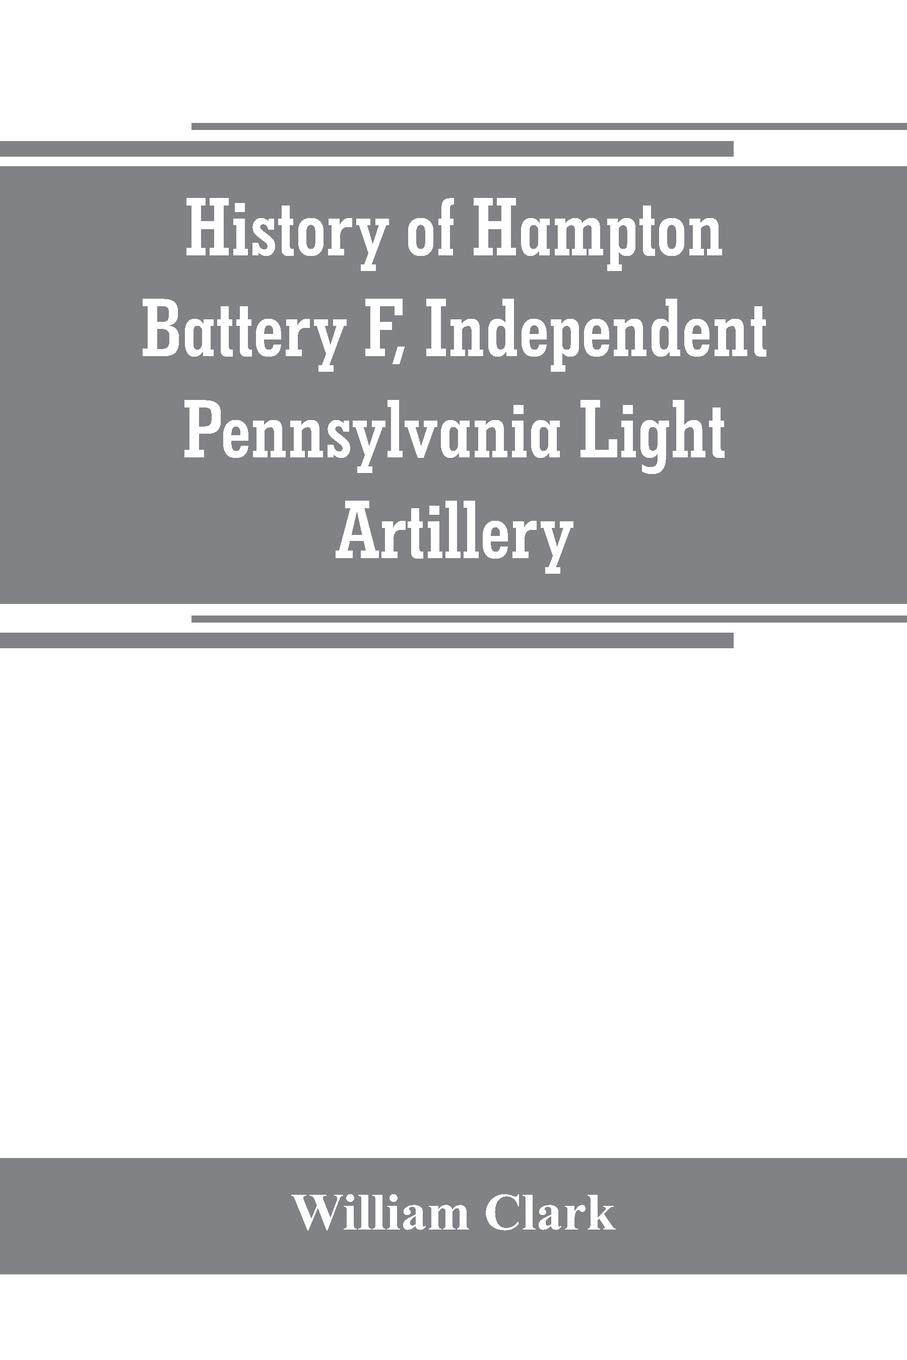 History of Hampton Battery F, Independent Pennsylvania Light Artillery. organized at Pittsburgh, Pa., October 8, 1861 ; mustered out in Pittsburg, June 26, 1865